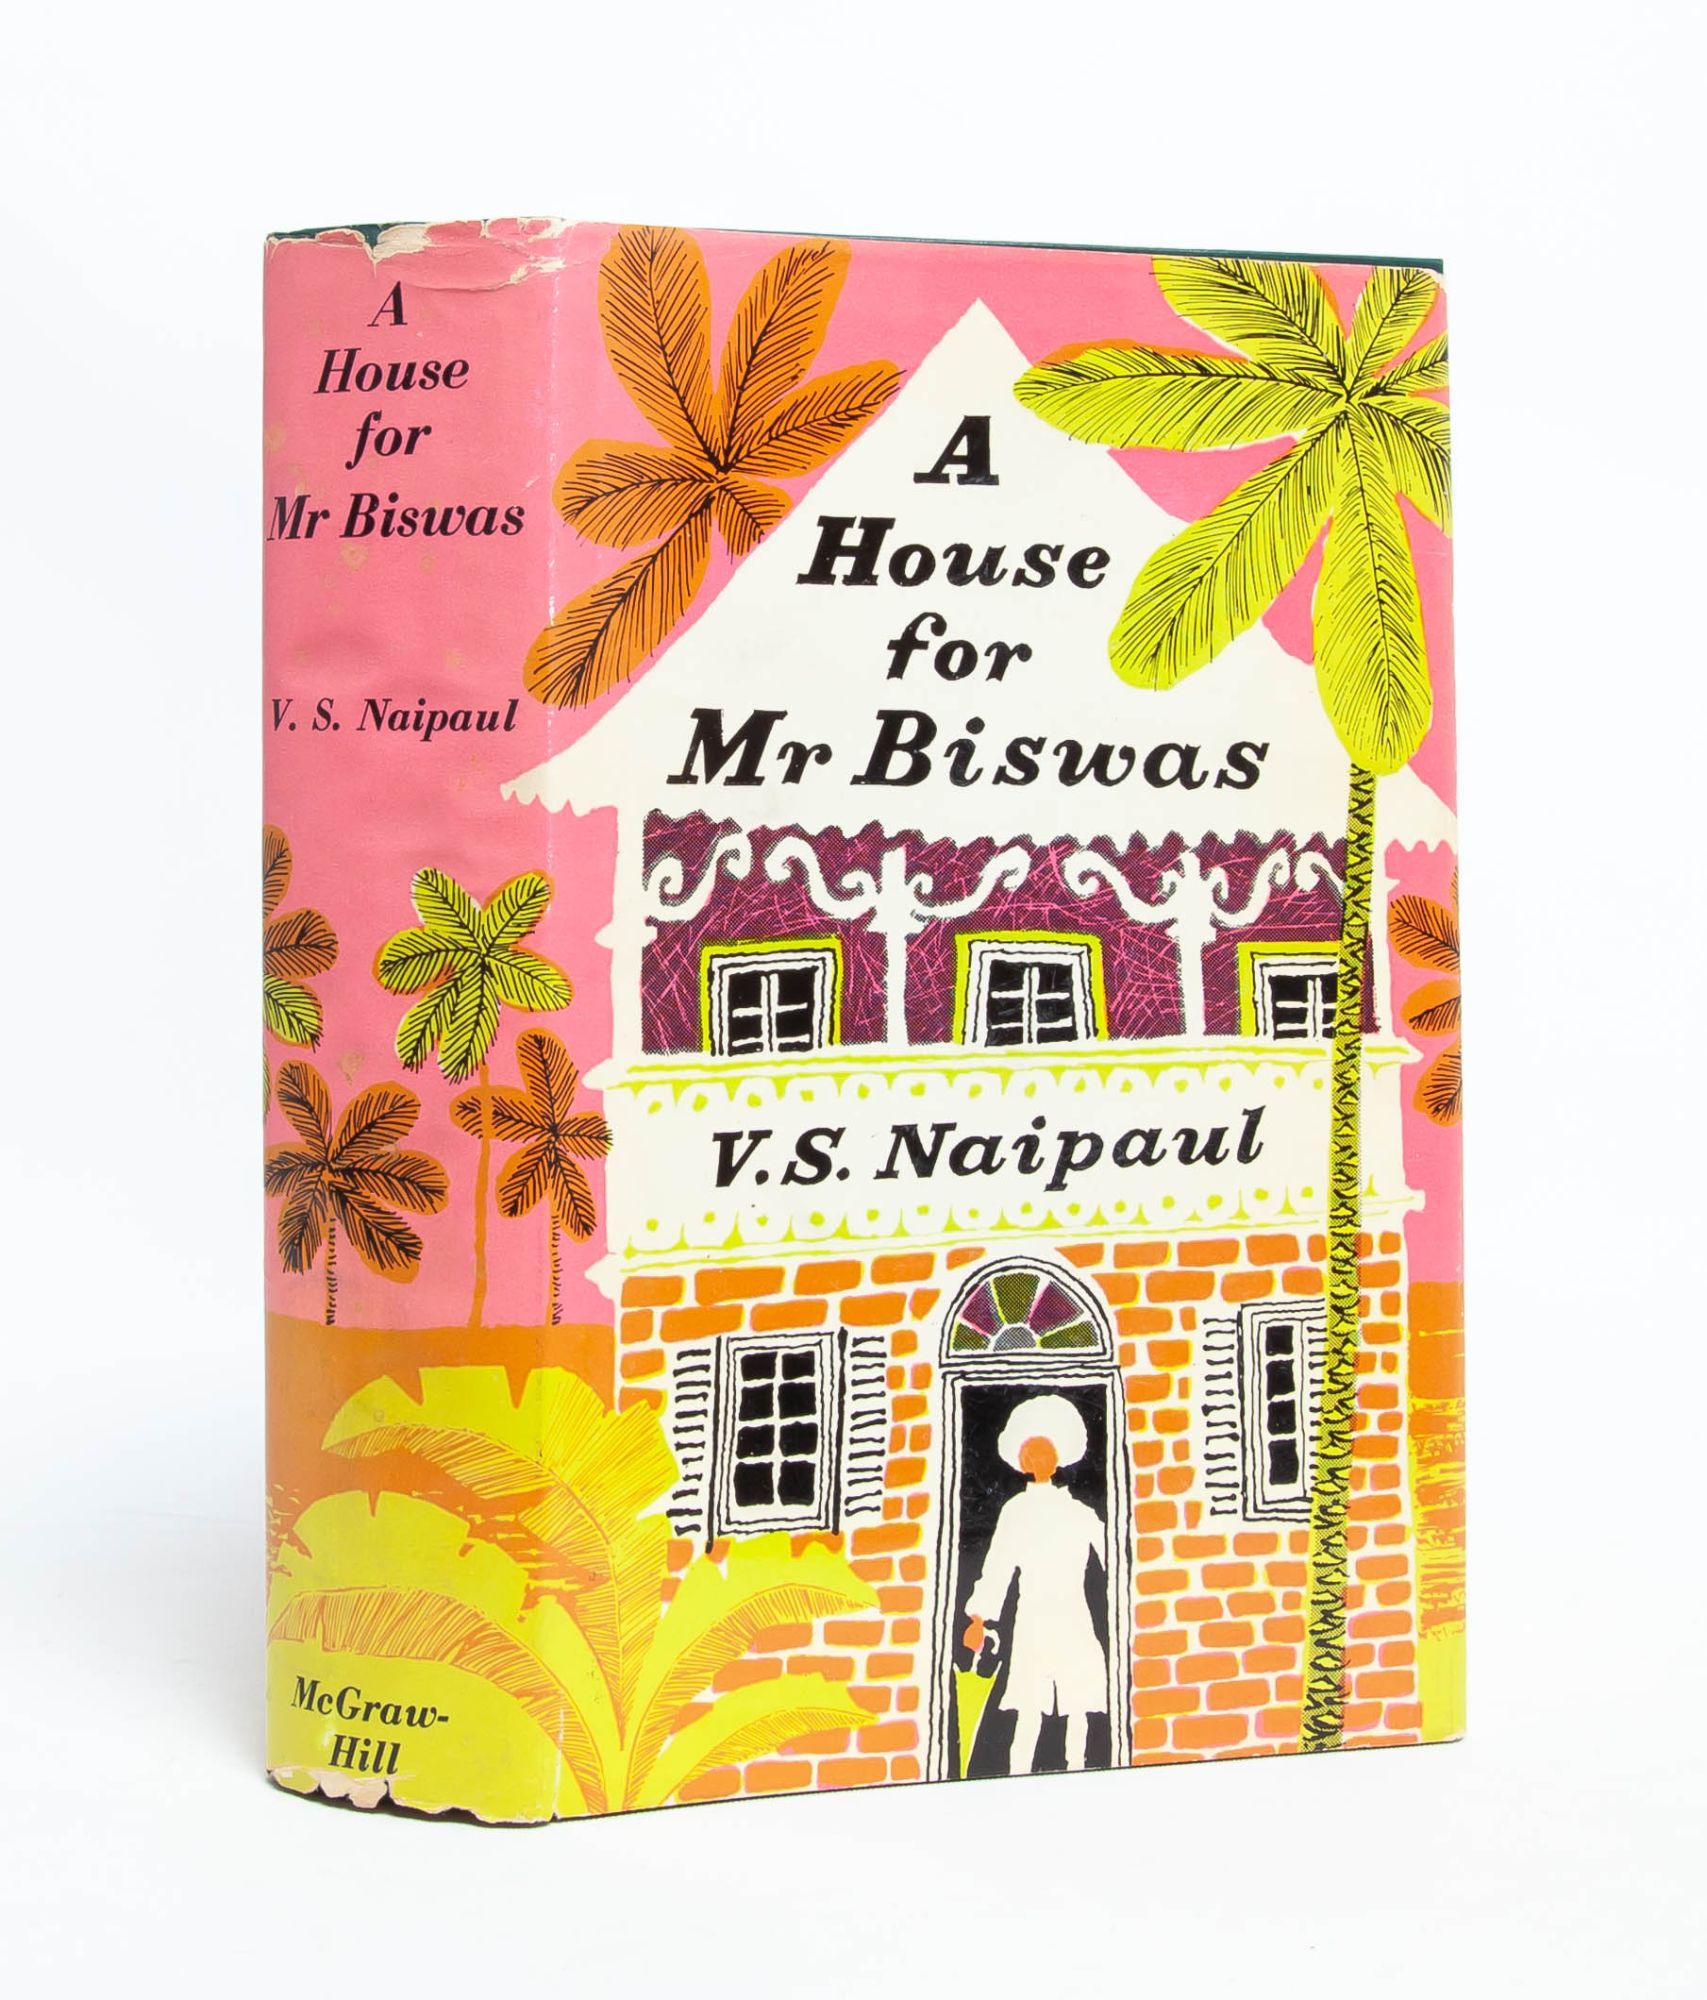 (Item #5833) A House for Mr. Biswas (Reviewer's copy). V. S. Naipaul.